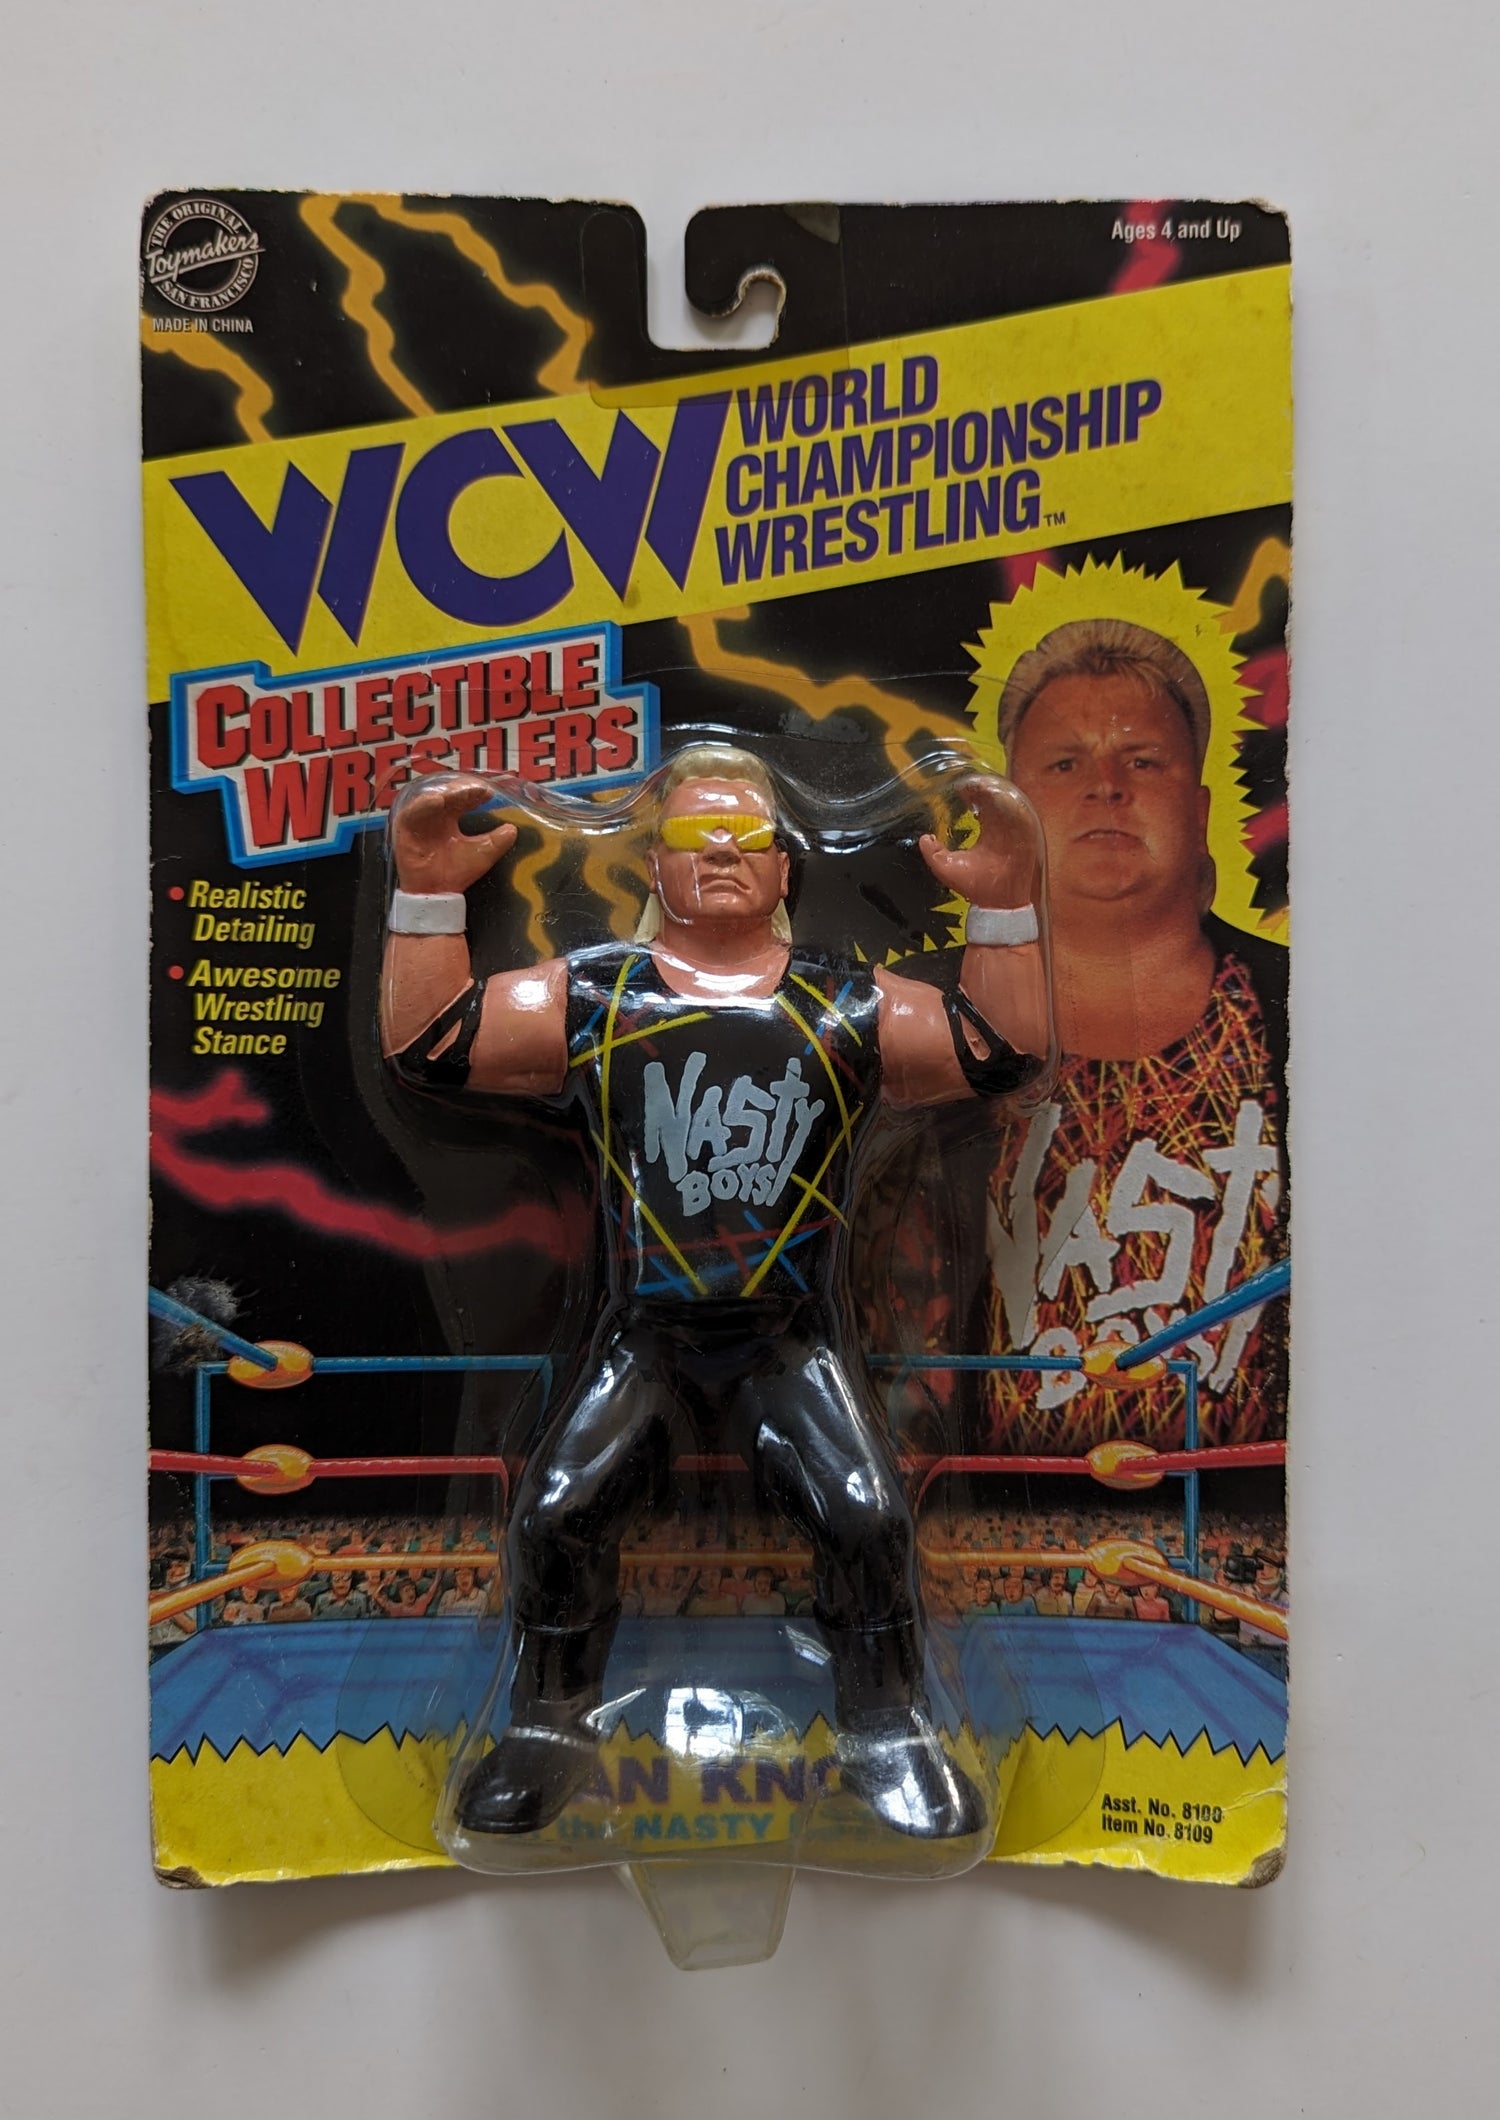 Original San Francisco Toy Makers WCW Collectible Wrestlers